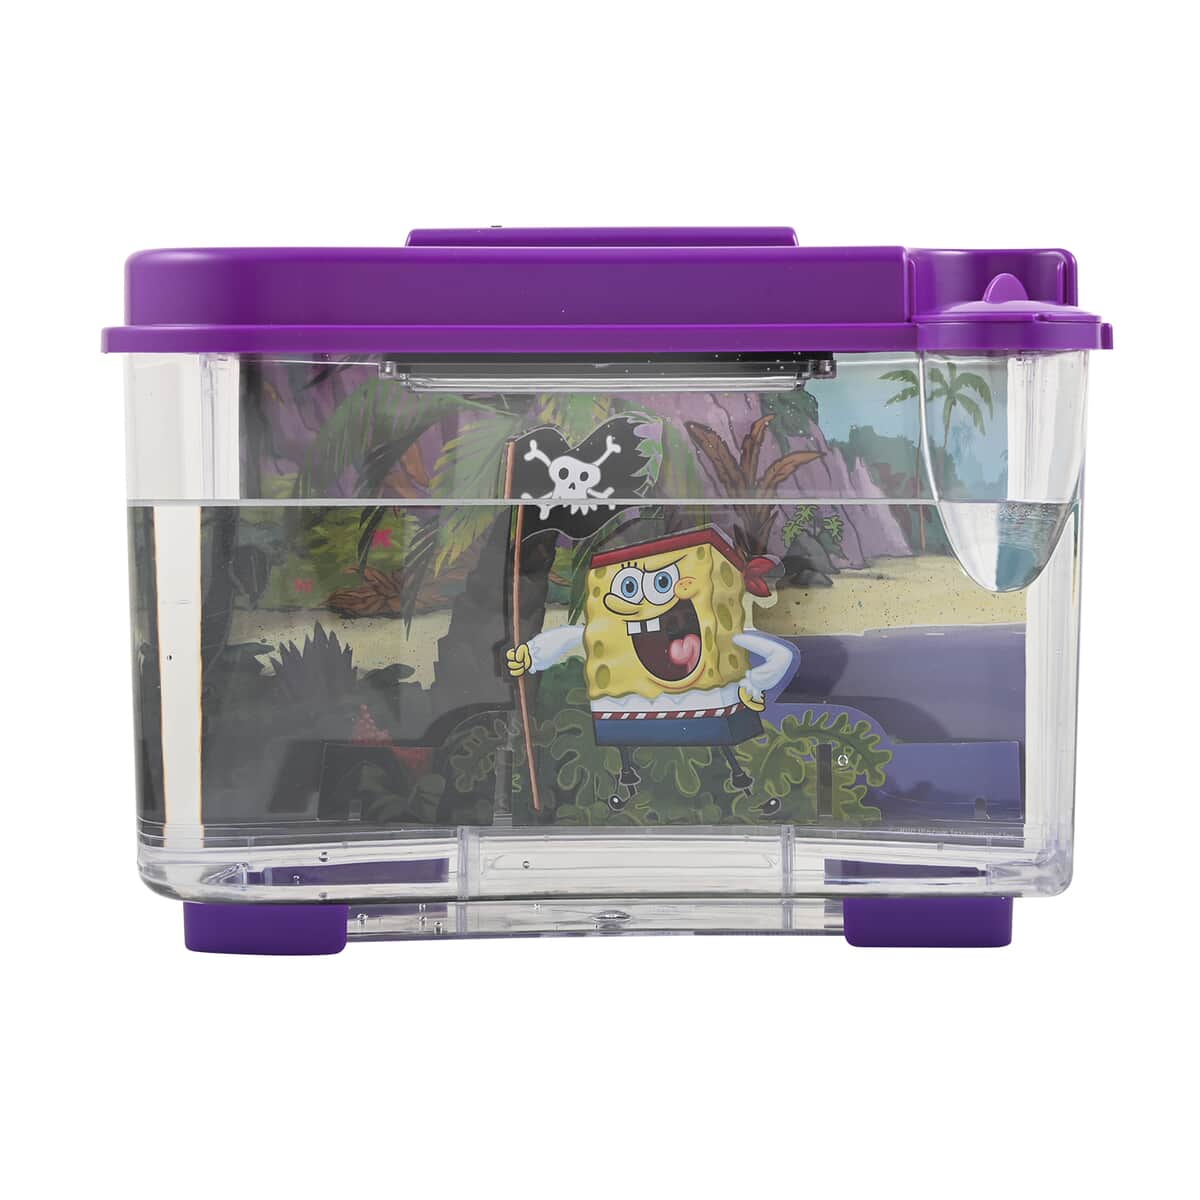 3D Spongebob Fish Tank with LED Night Light (4 AAA Batteries not Included) image number 0